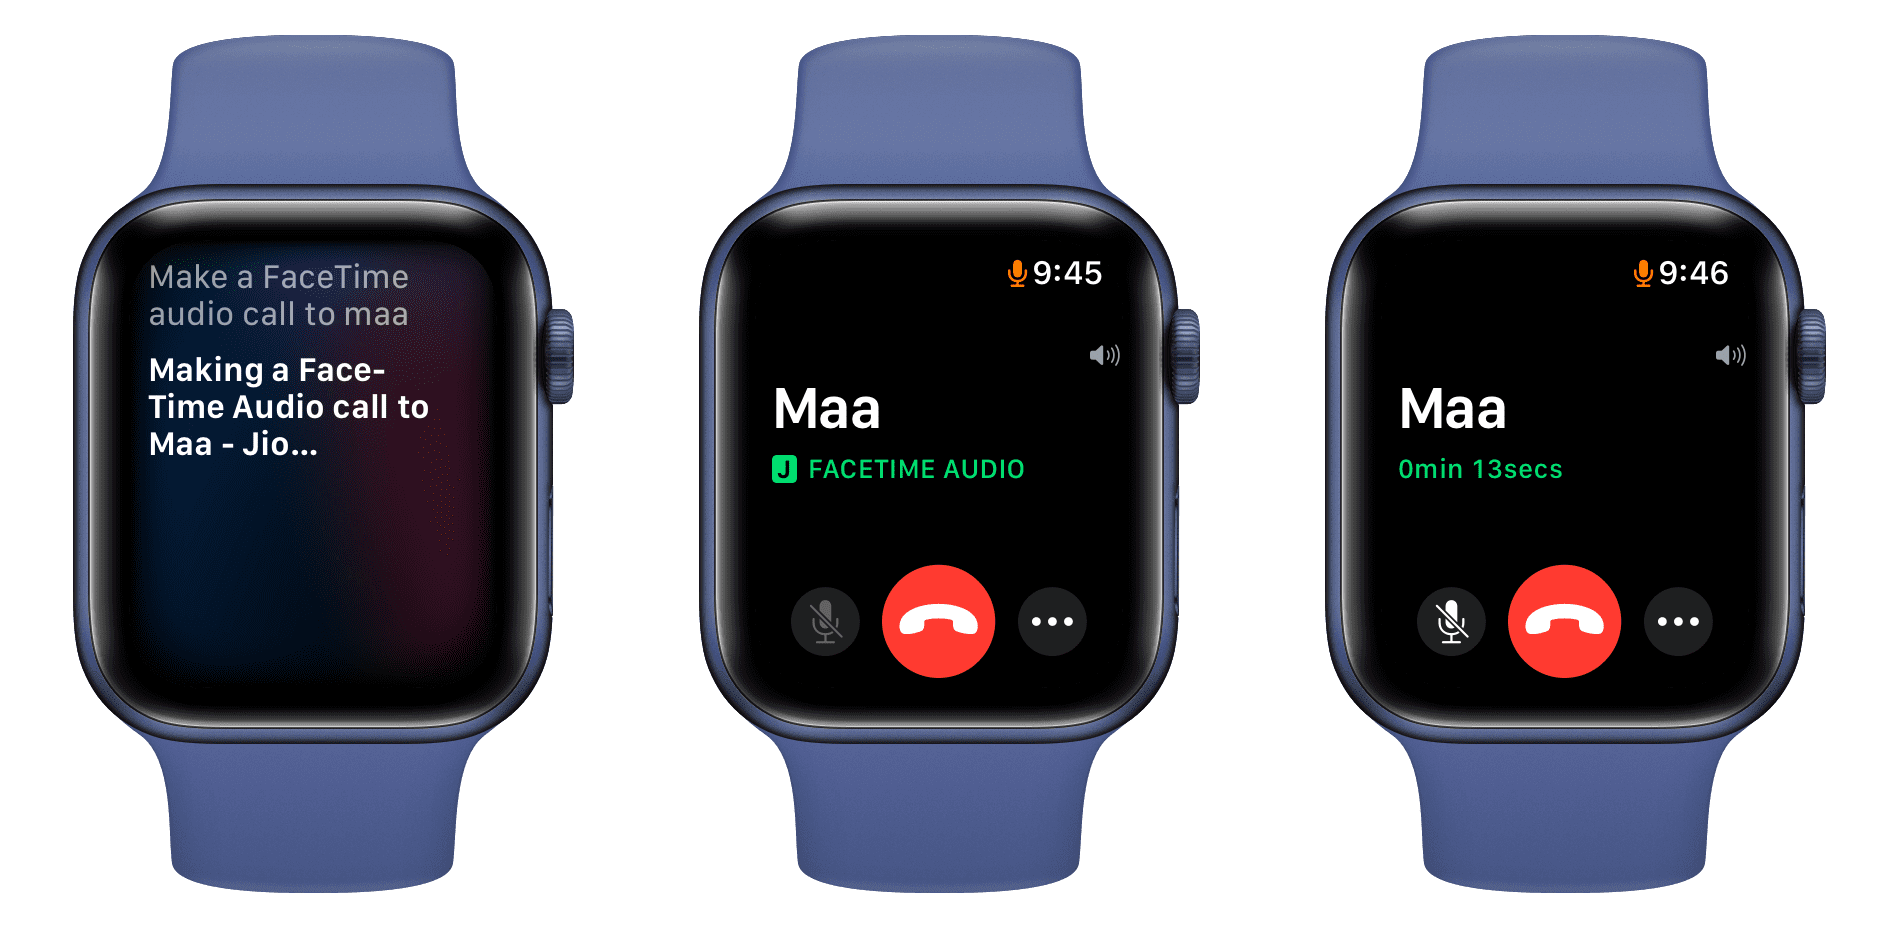 Three images showing how to make FaceTime call on Apple Watch using Siri